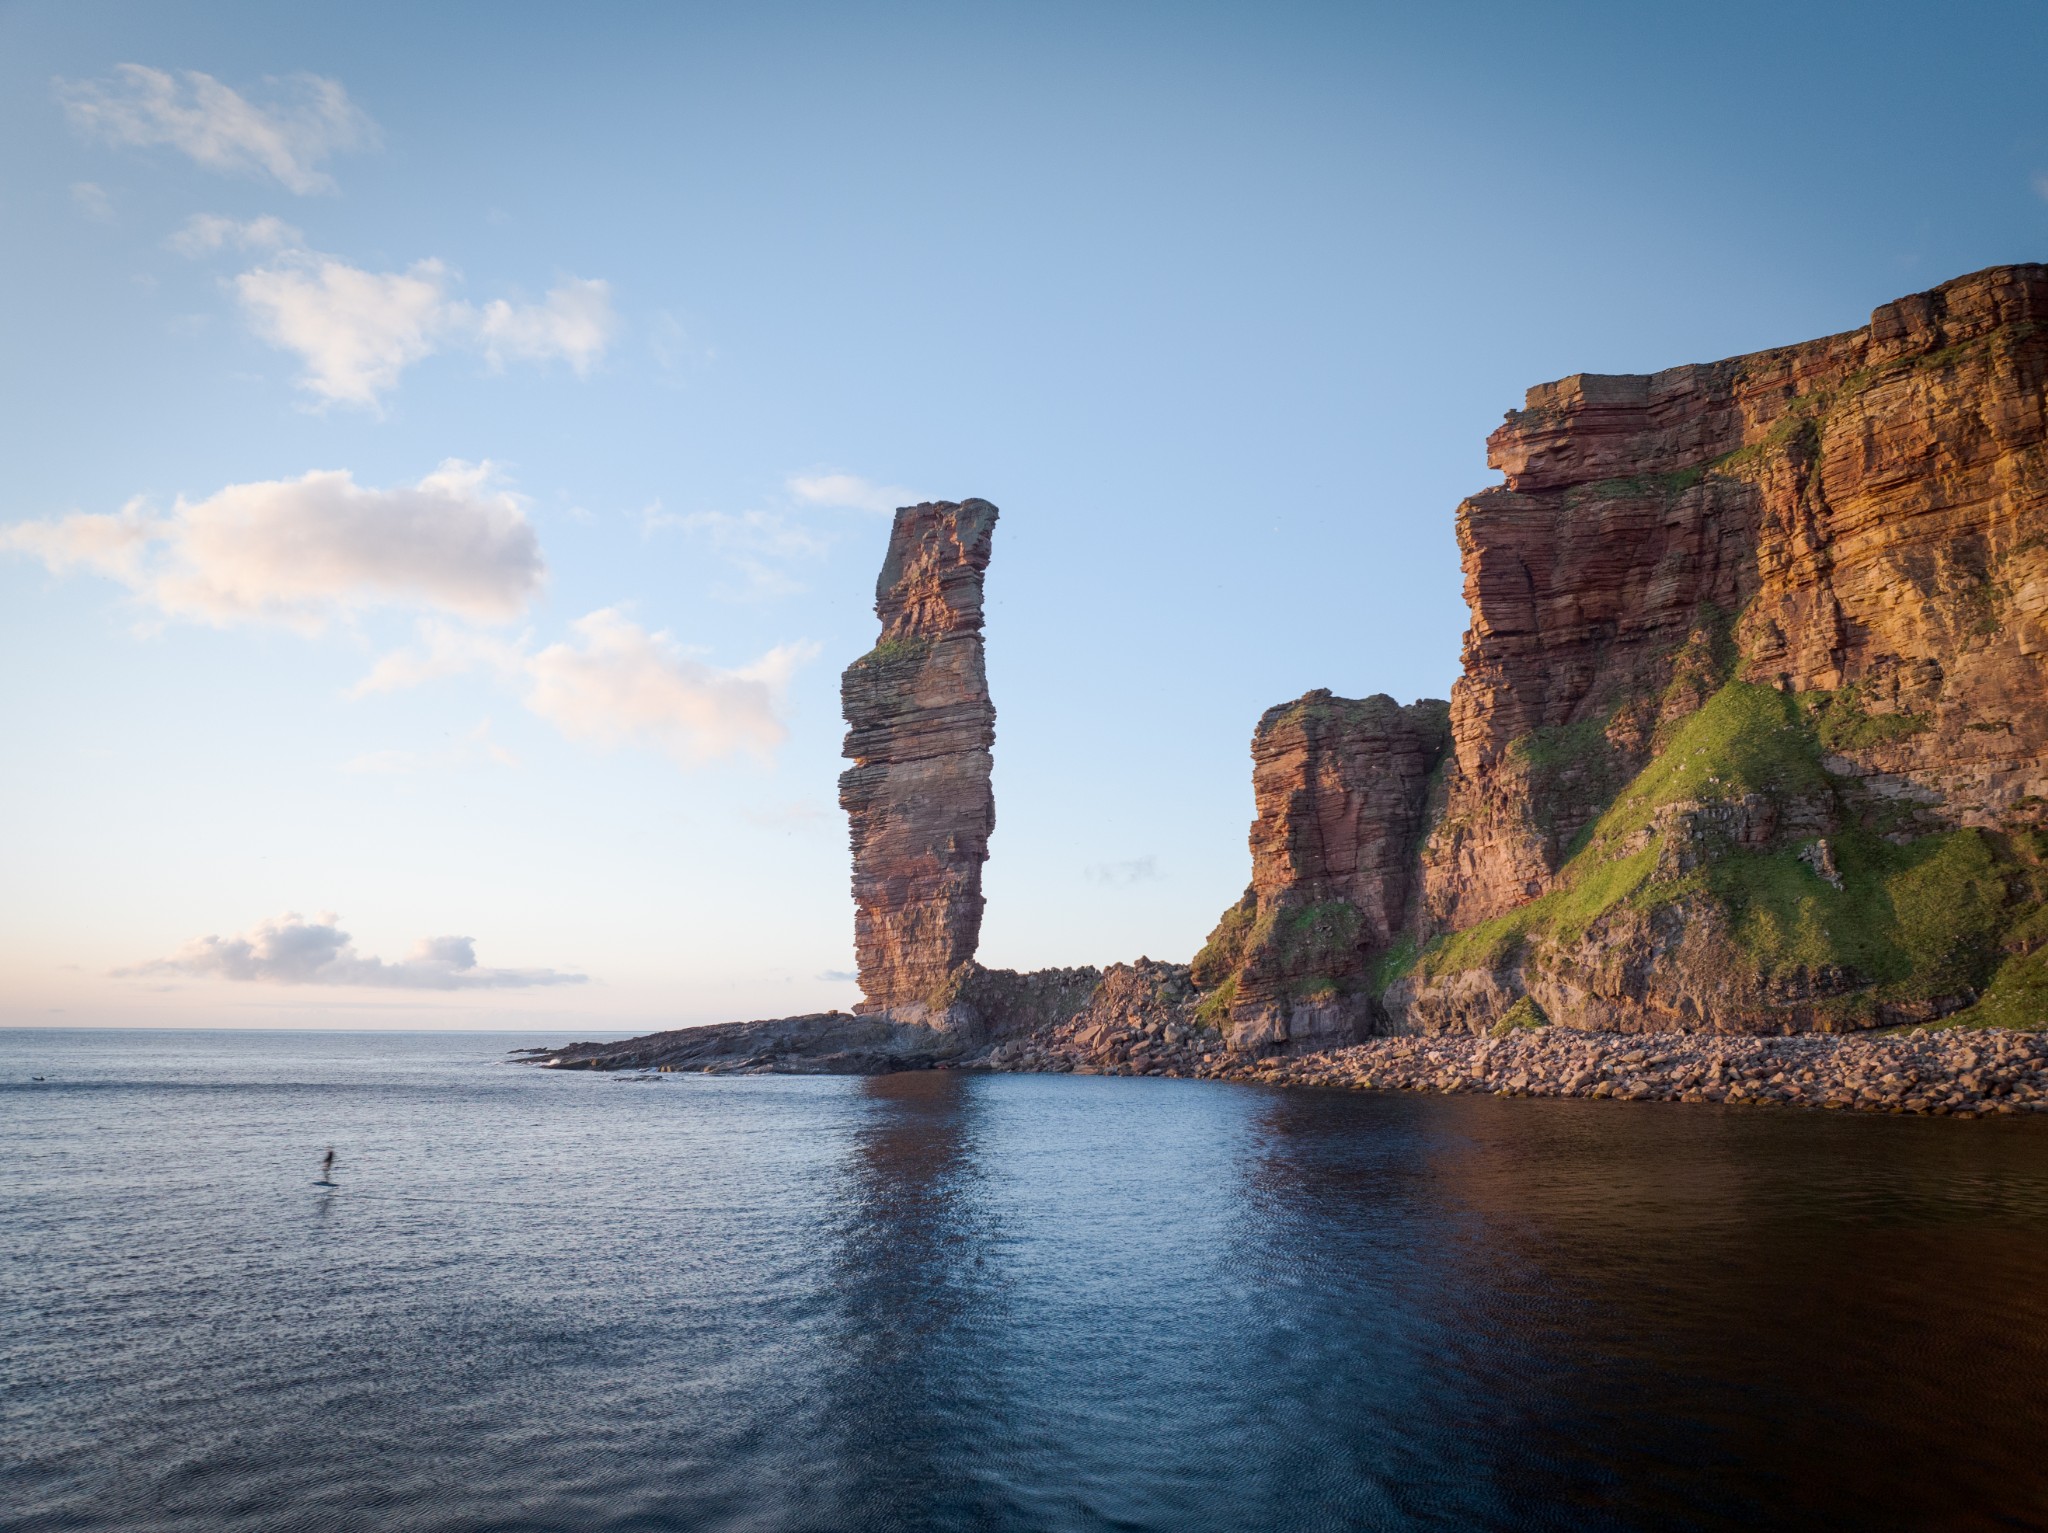 eFoiling at the Old Man of Hoy, Orkney